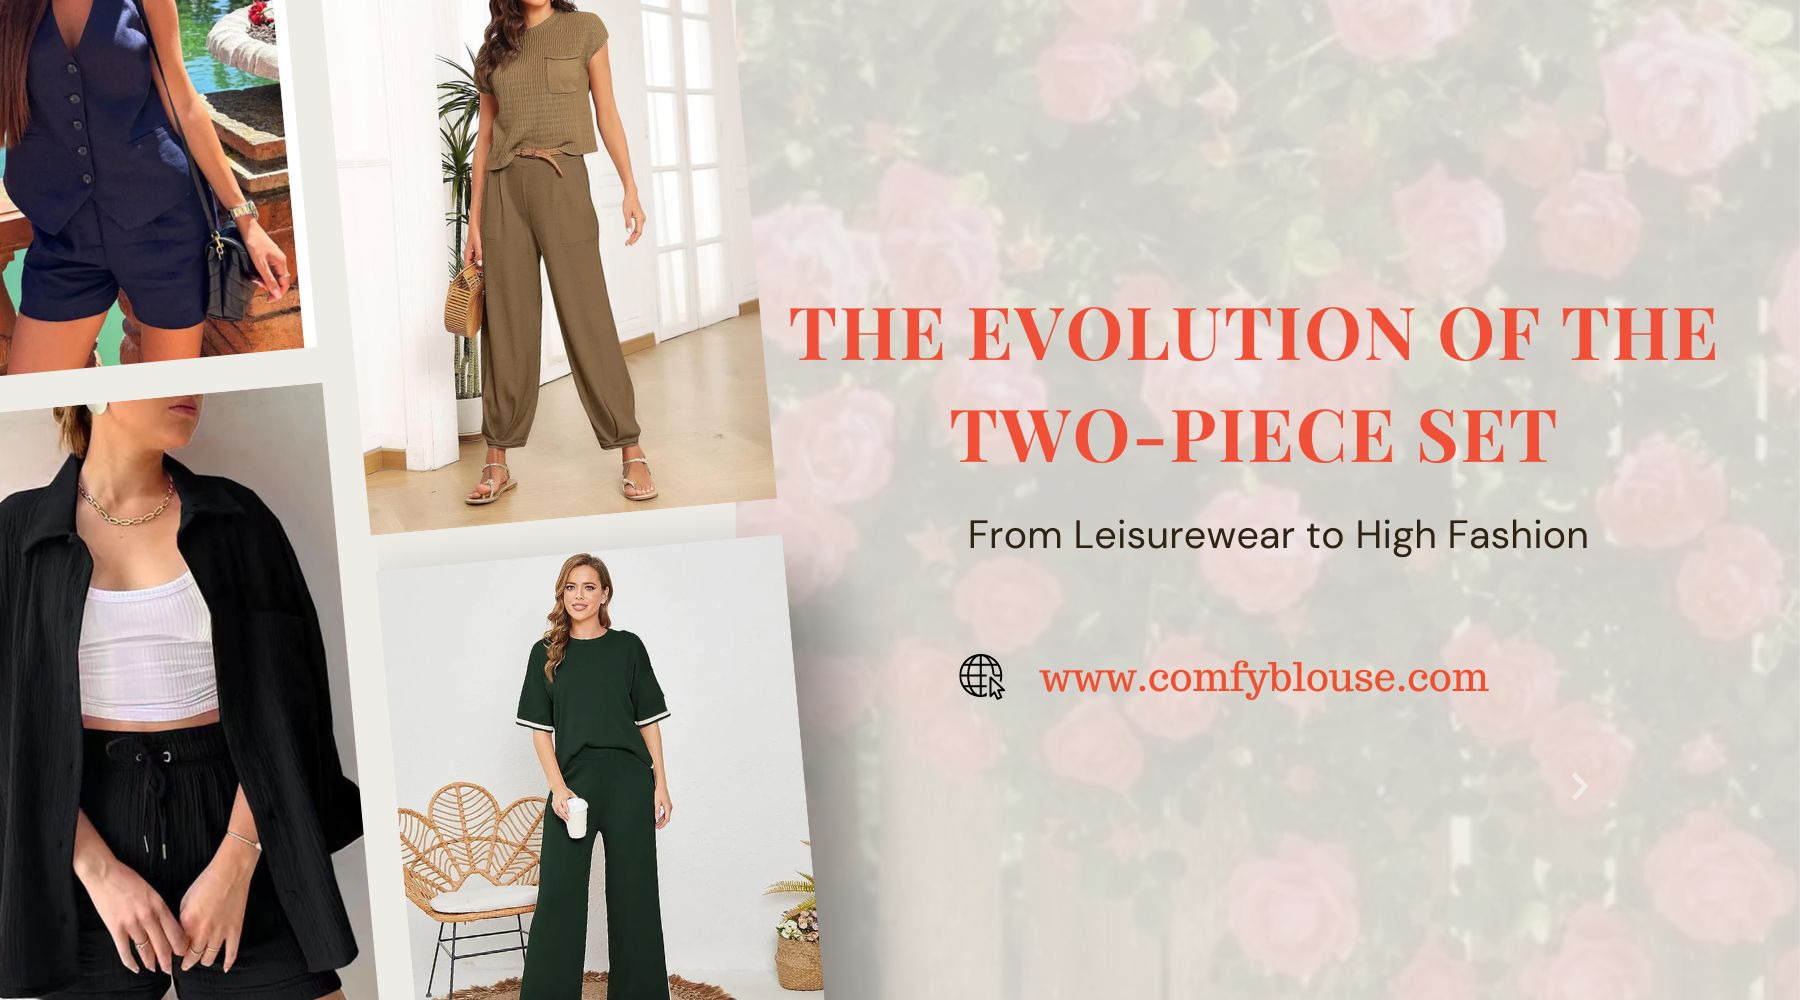 The Evolution of the Two-Piece Set: From Leisurewear to High Fashion